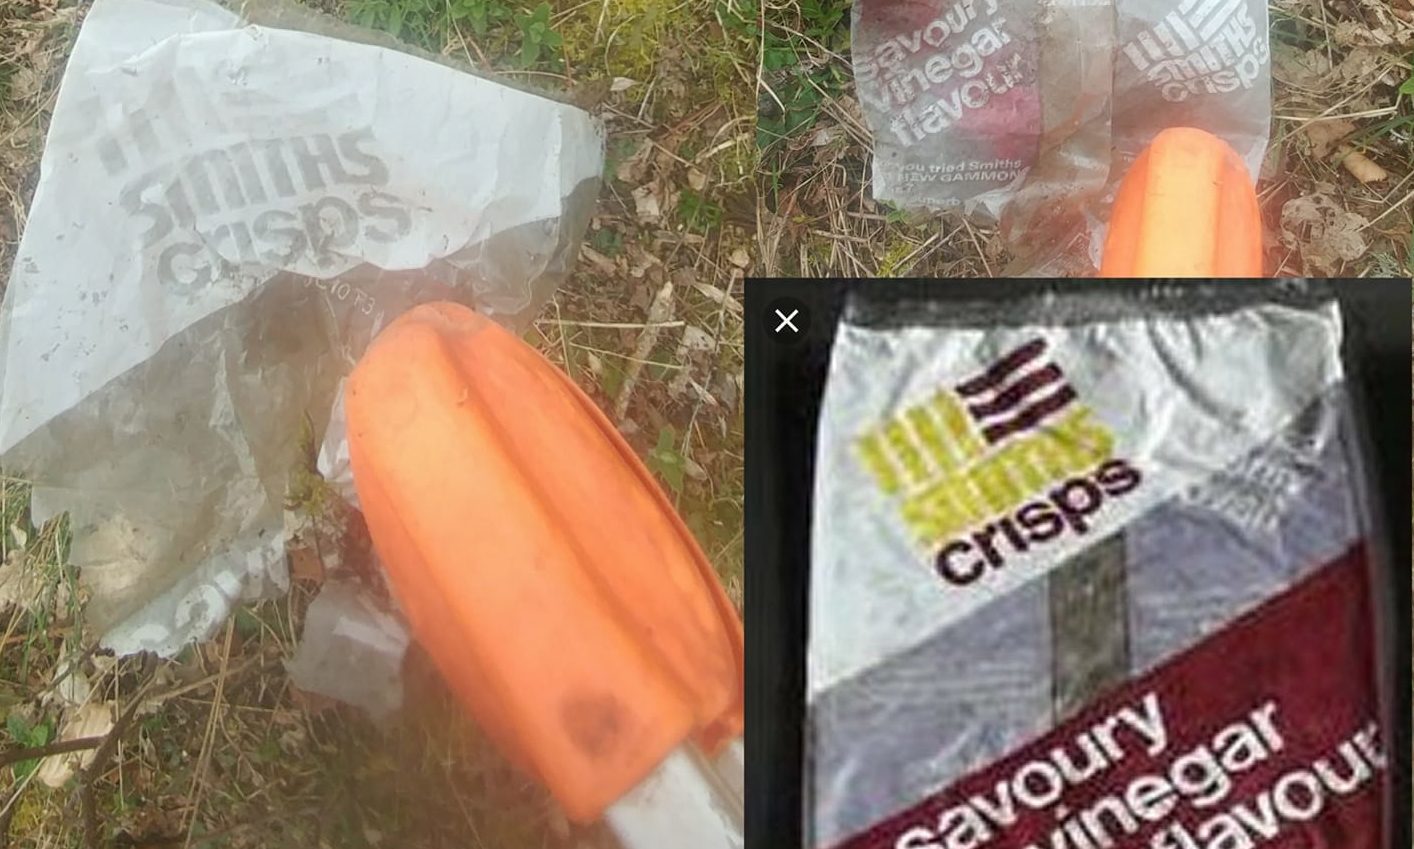 The old Smiths crisp packet found at Kinnoull Hill, Perth